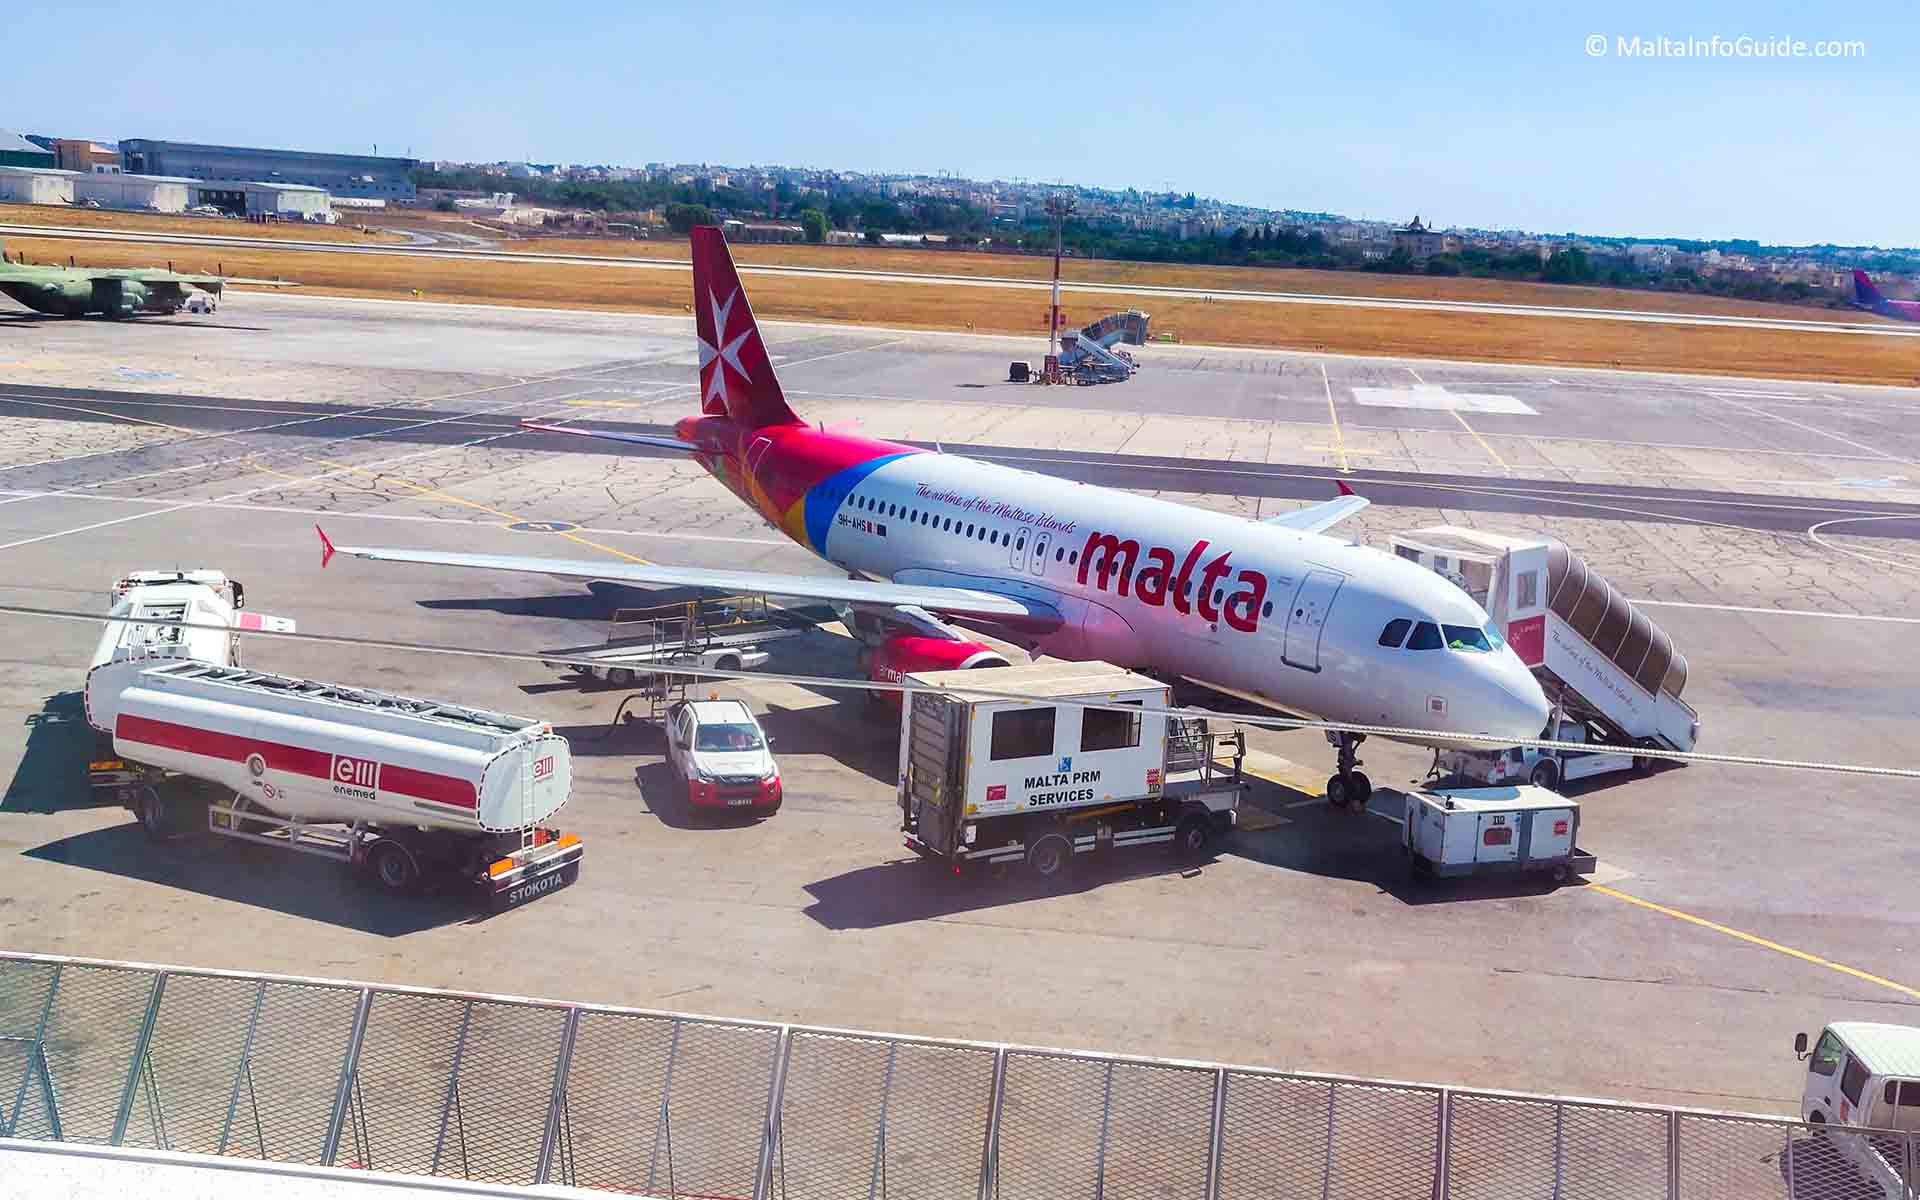 The best way of getting to Malta. Air Malta being loaded with fuel, luggage's and passengers.